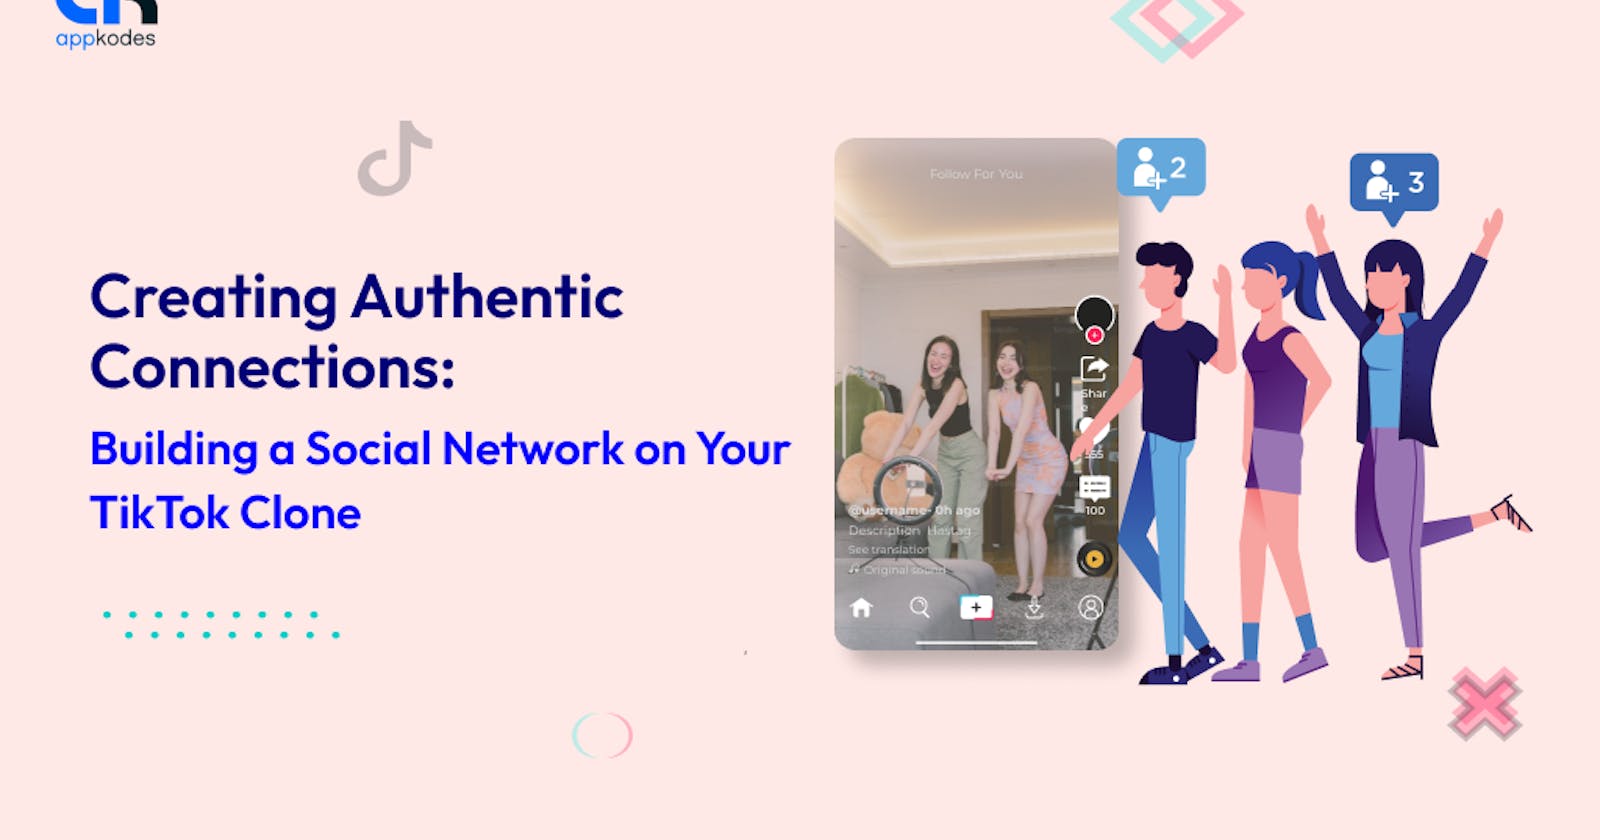 Creating Authentic Connections: Building a Social Network on Your TikTok Clone